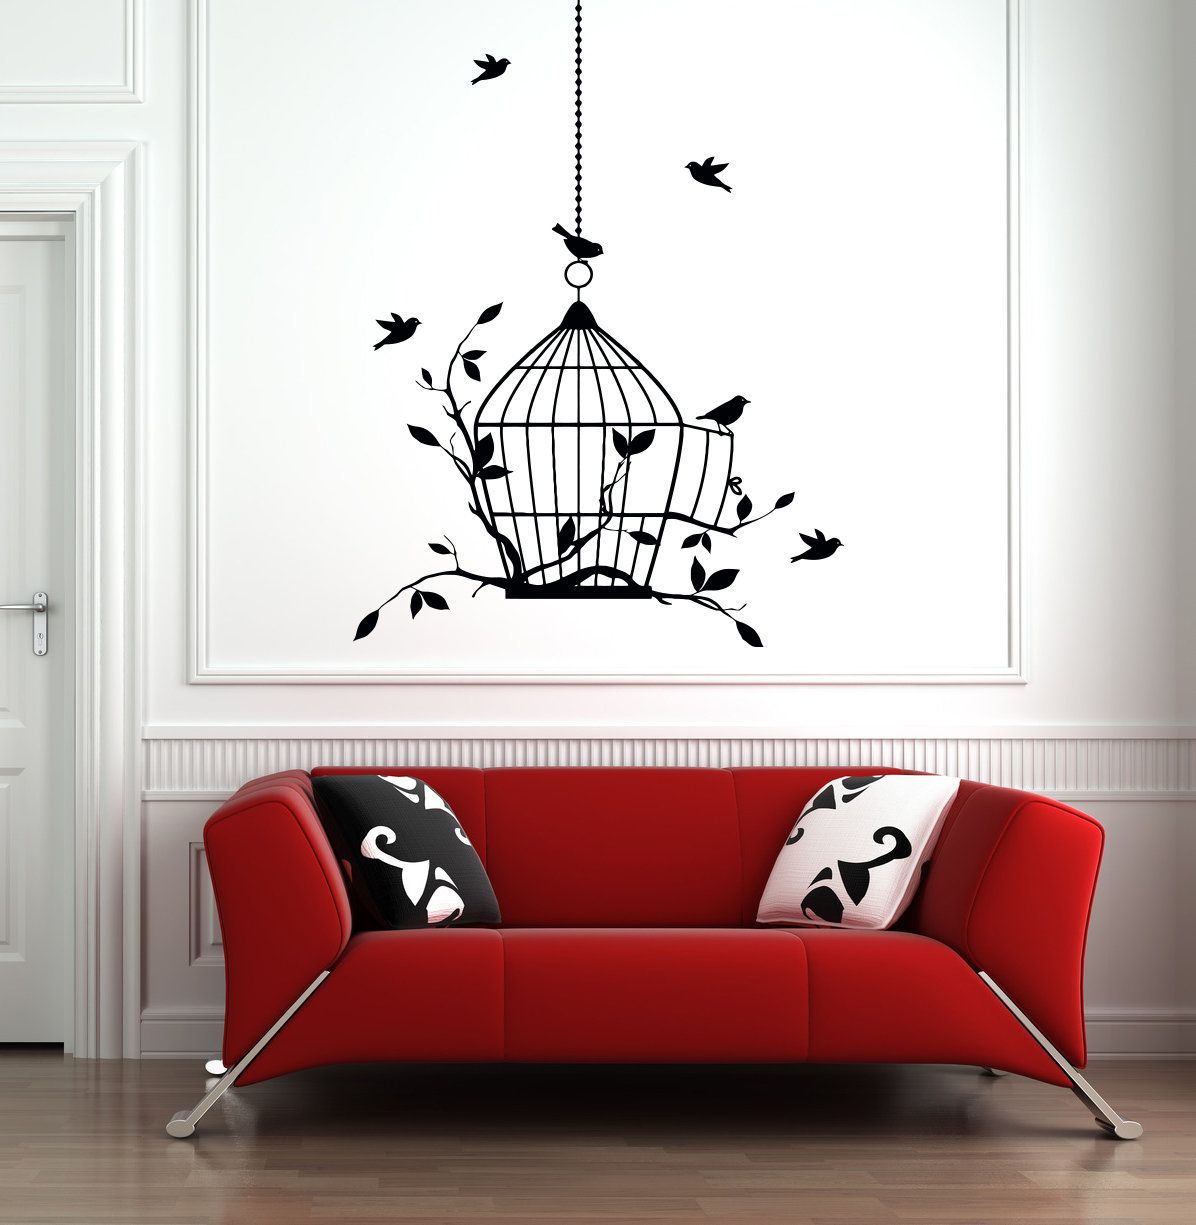 Tree Branch Wall Decal Bird Cage Wall Decal Birds Wall – Etsy Within 2017 Bird On Tree Branch Wall Art (View 10 of 20)